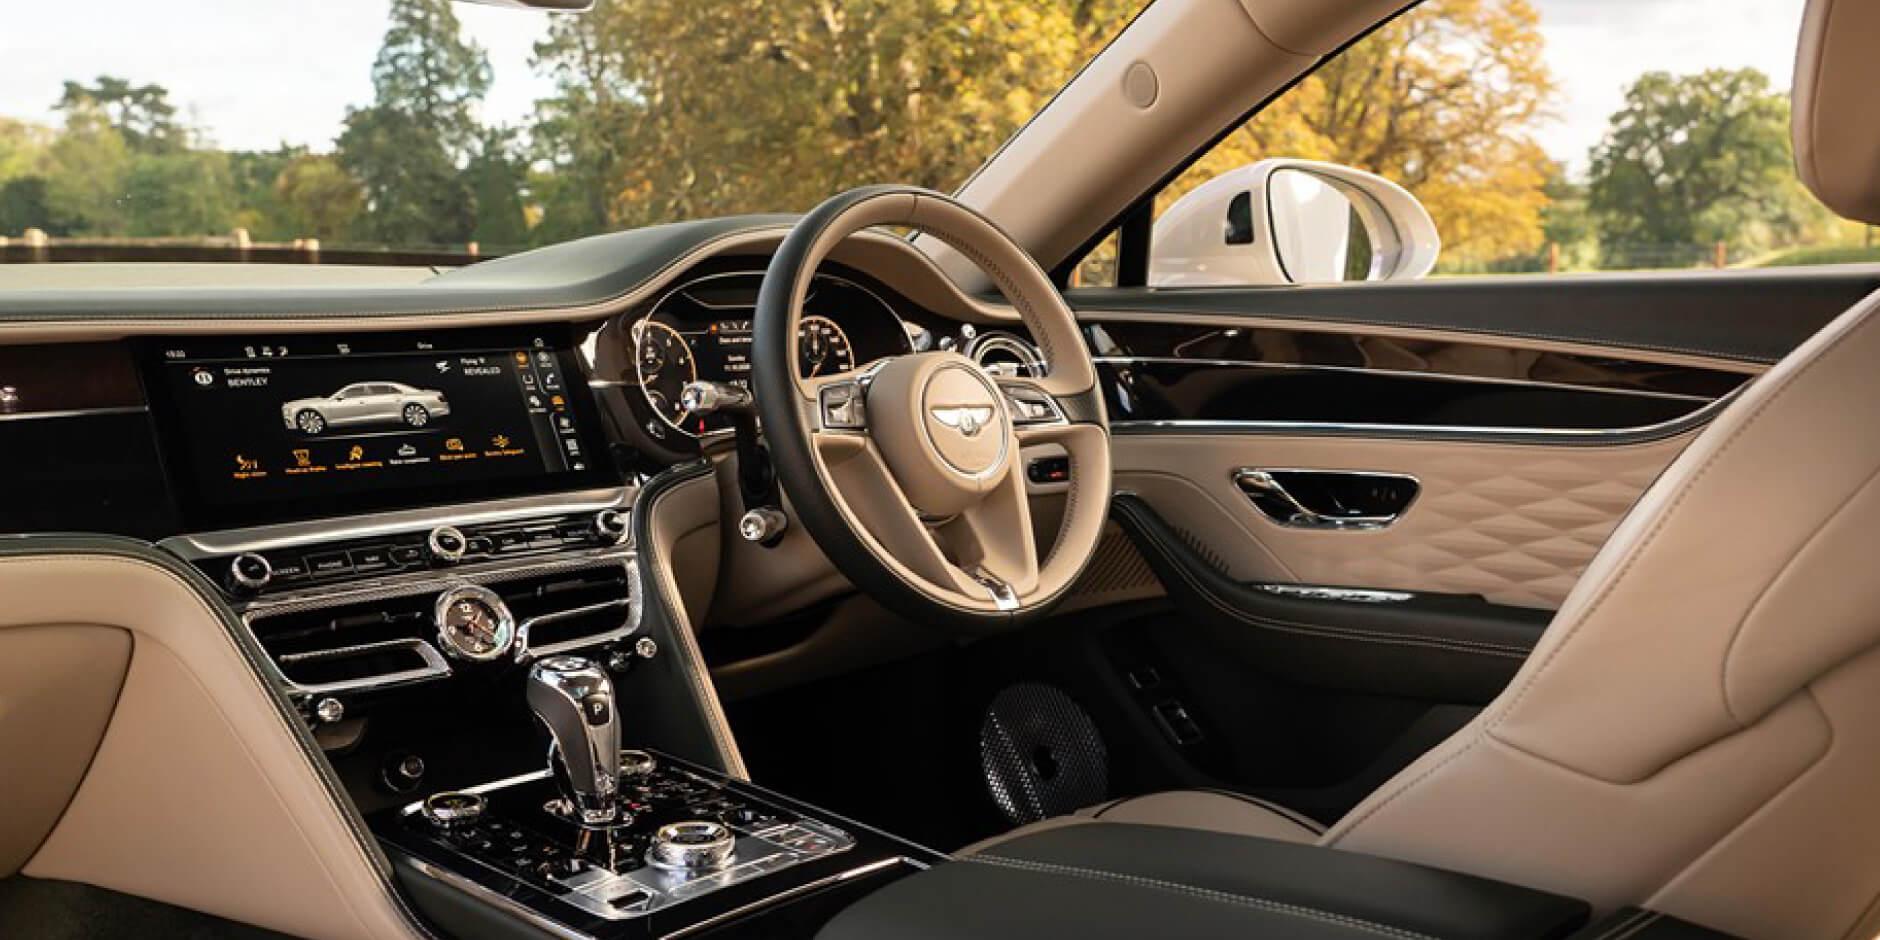 Exploring Sheffield in Luxury: Why the Bentley Flying Spur is Your Ultimate Travel Companion